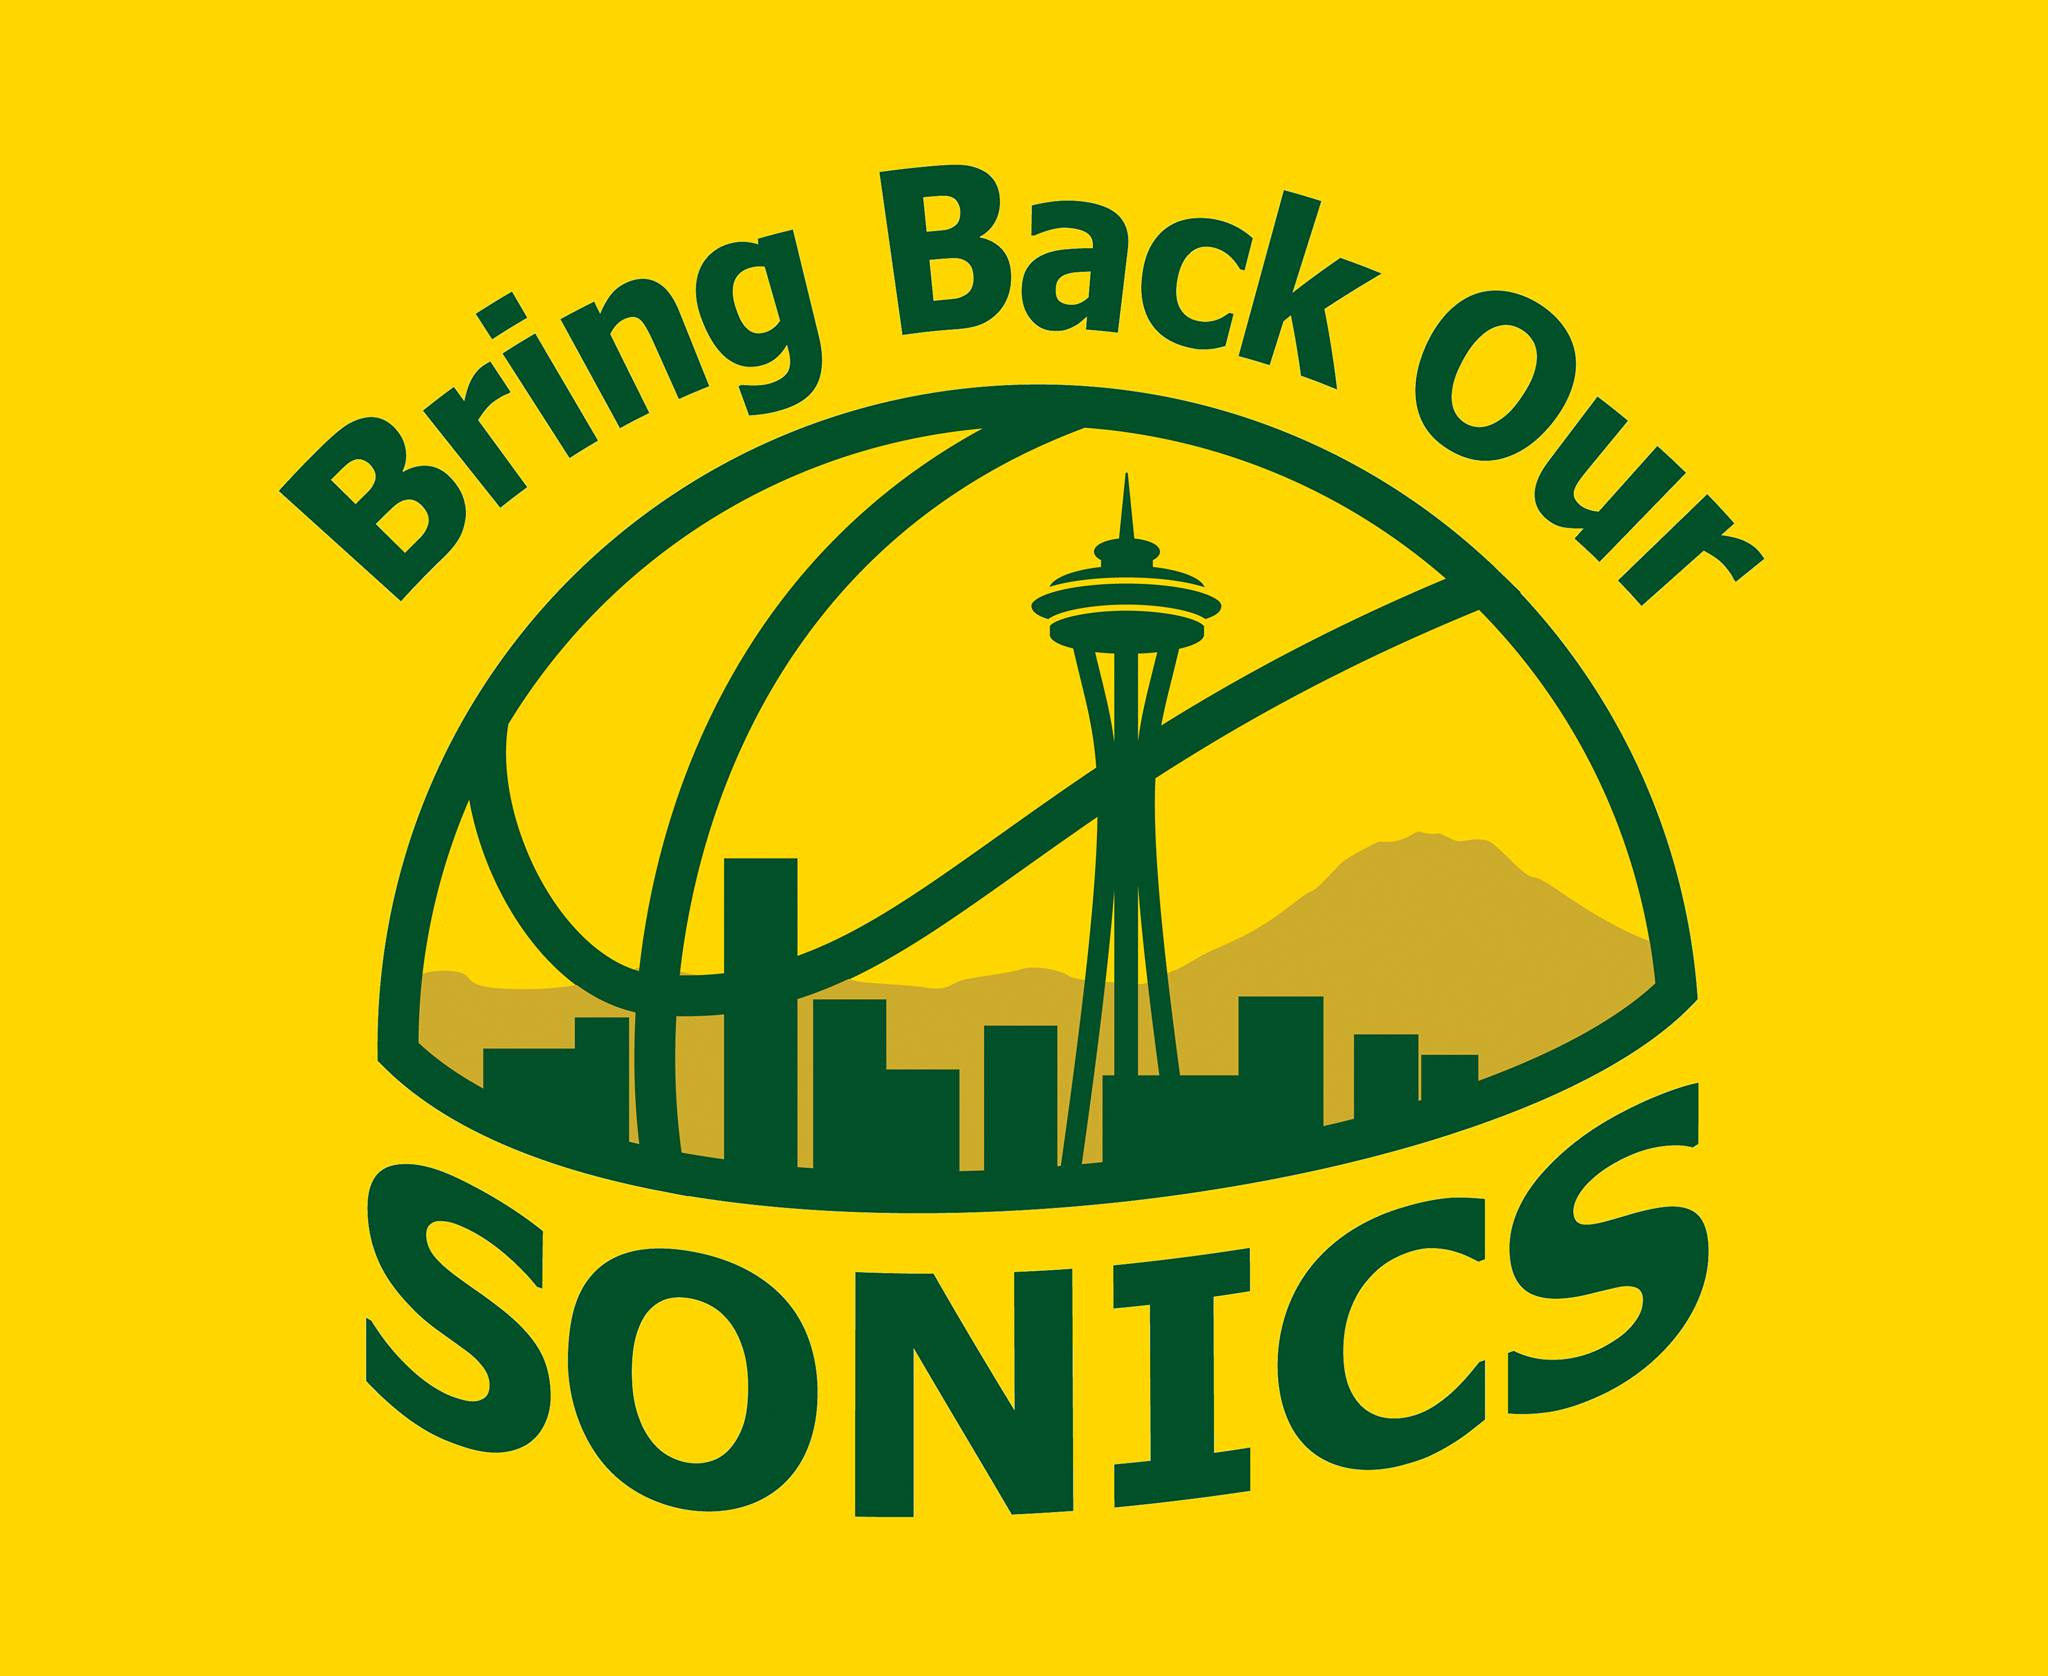 Our Home Team: Seattle as a Basketball City - Sonics Rising